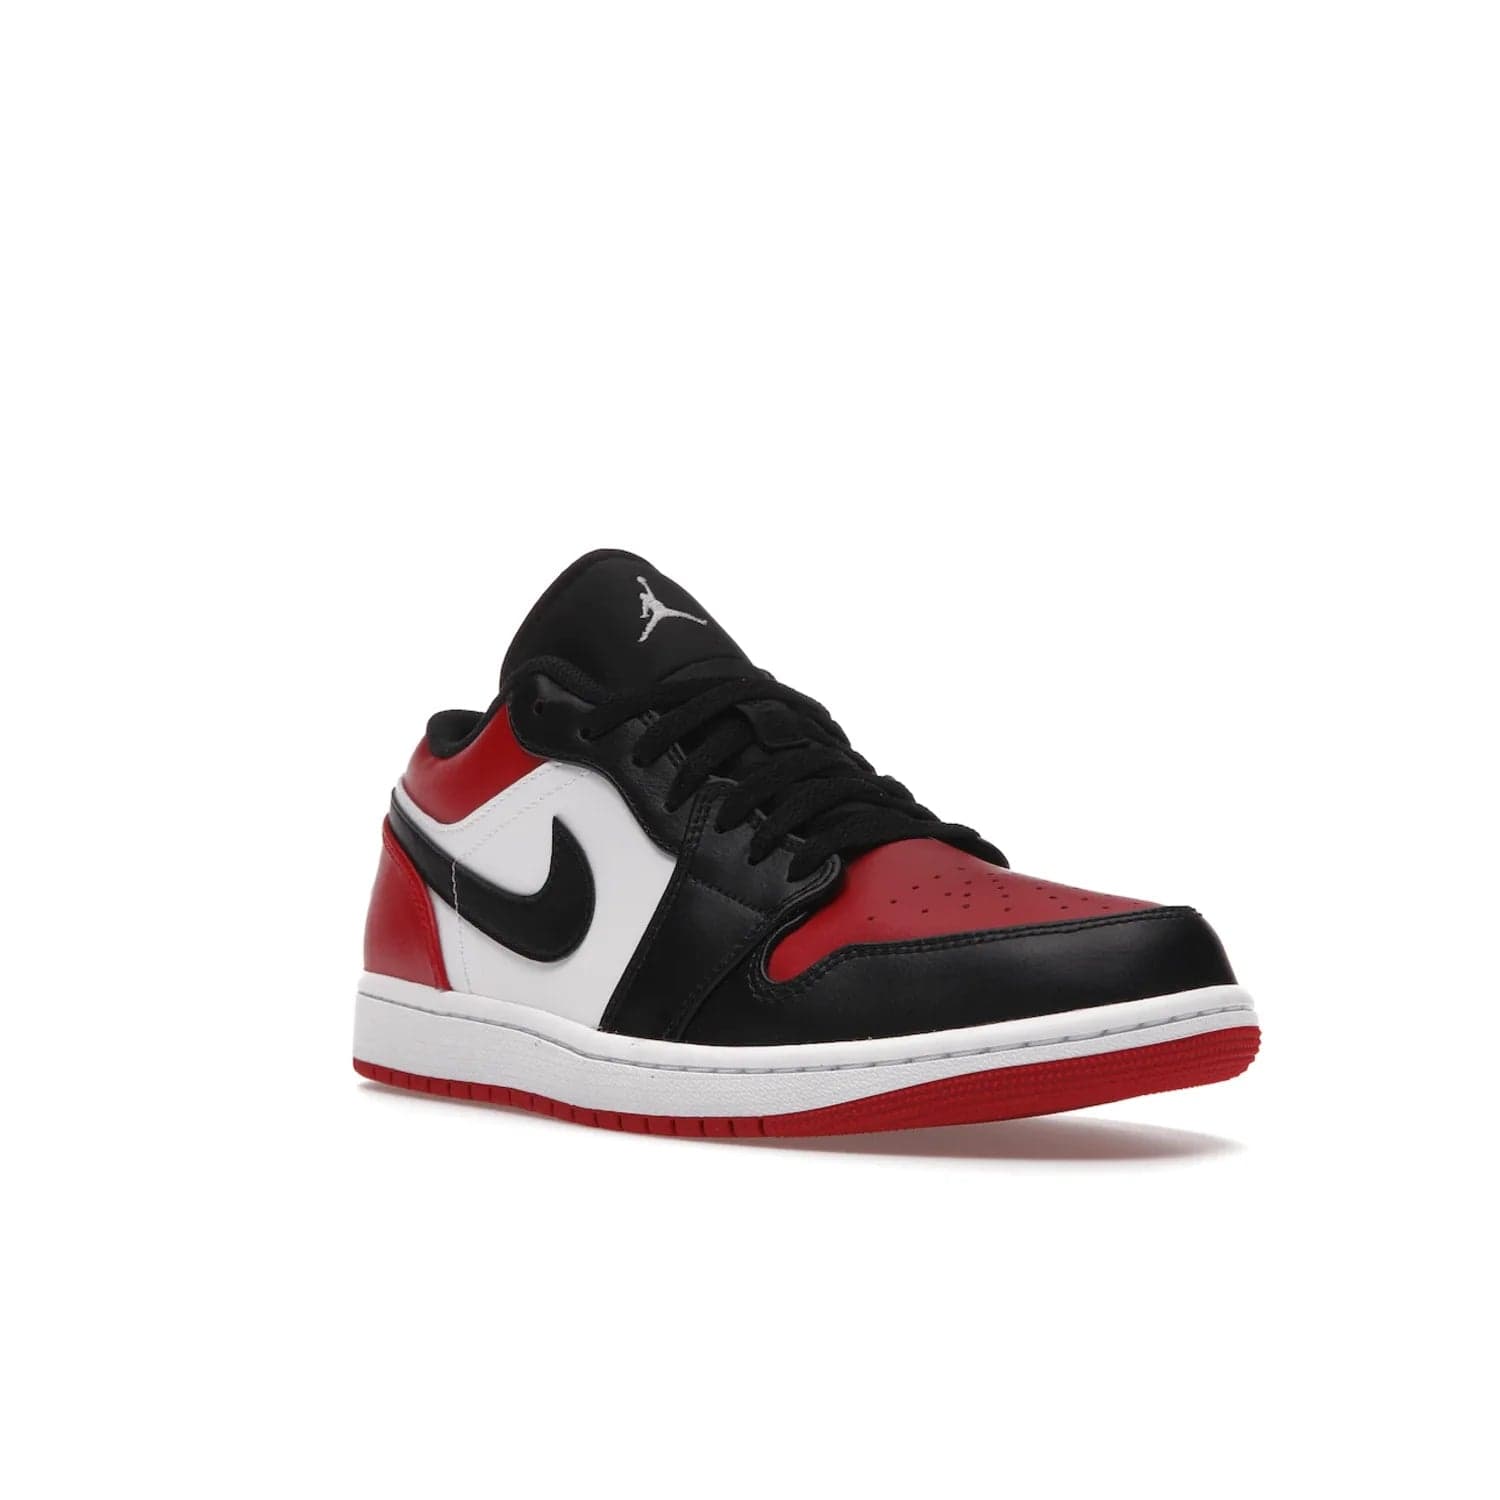 Jordan 1 Low Bred Toe - Image 6 - Only at www.BallersClubKickz.com - Step into the iconic Jordan 1 Retro. Mixing and matching of leather in red, black, and white makes for a unique colorway. Finished off with a Wing logo embroidery & Jumpman label. Comfortable and stylish at an affordable $100, the Jordan 1 Low Bred Toe is perfect for any true sneaker fan.